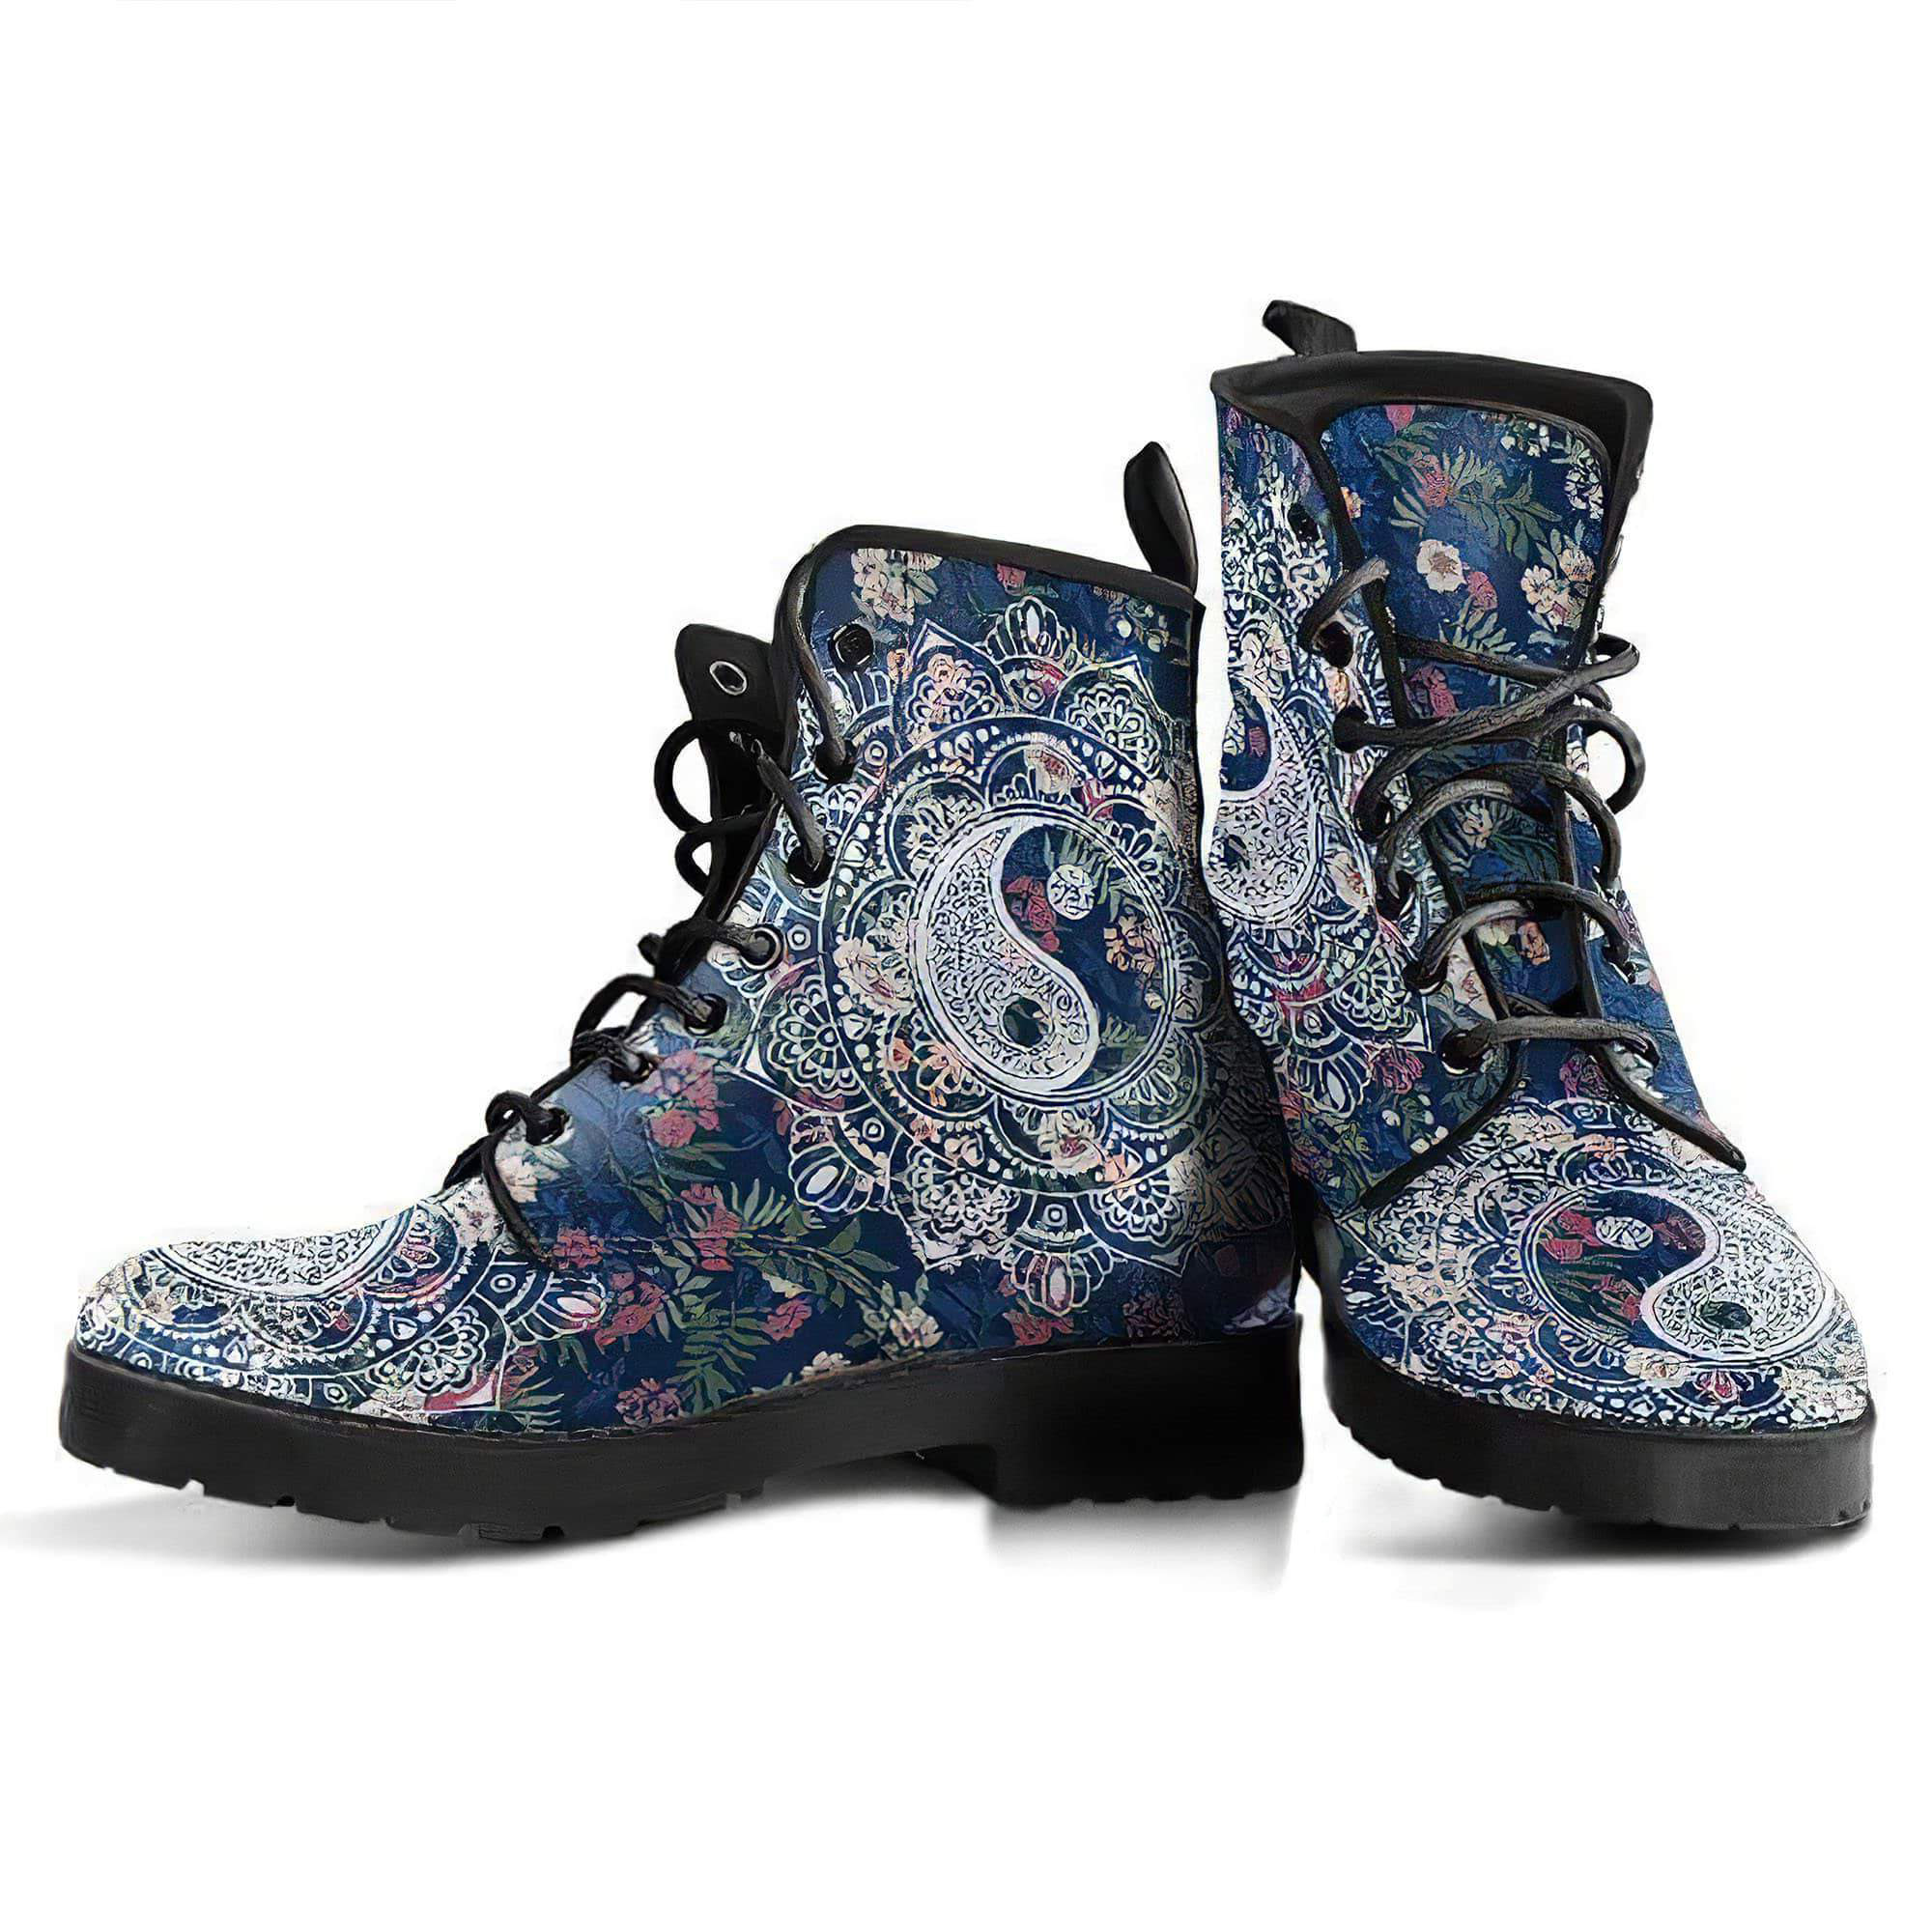 yin-yang-floral-handcrafted-boots-women-s-leather-boots-12051980025917.jpg